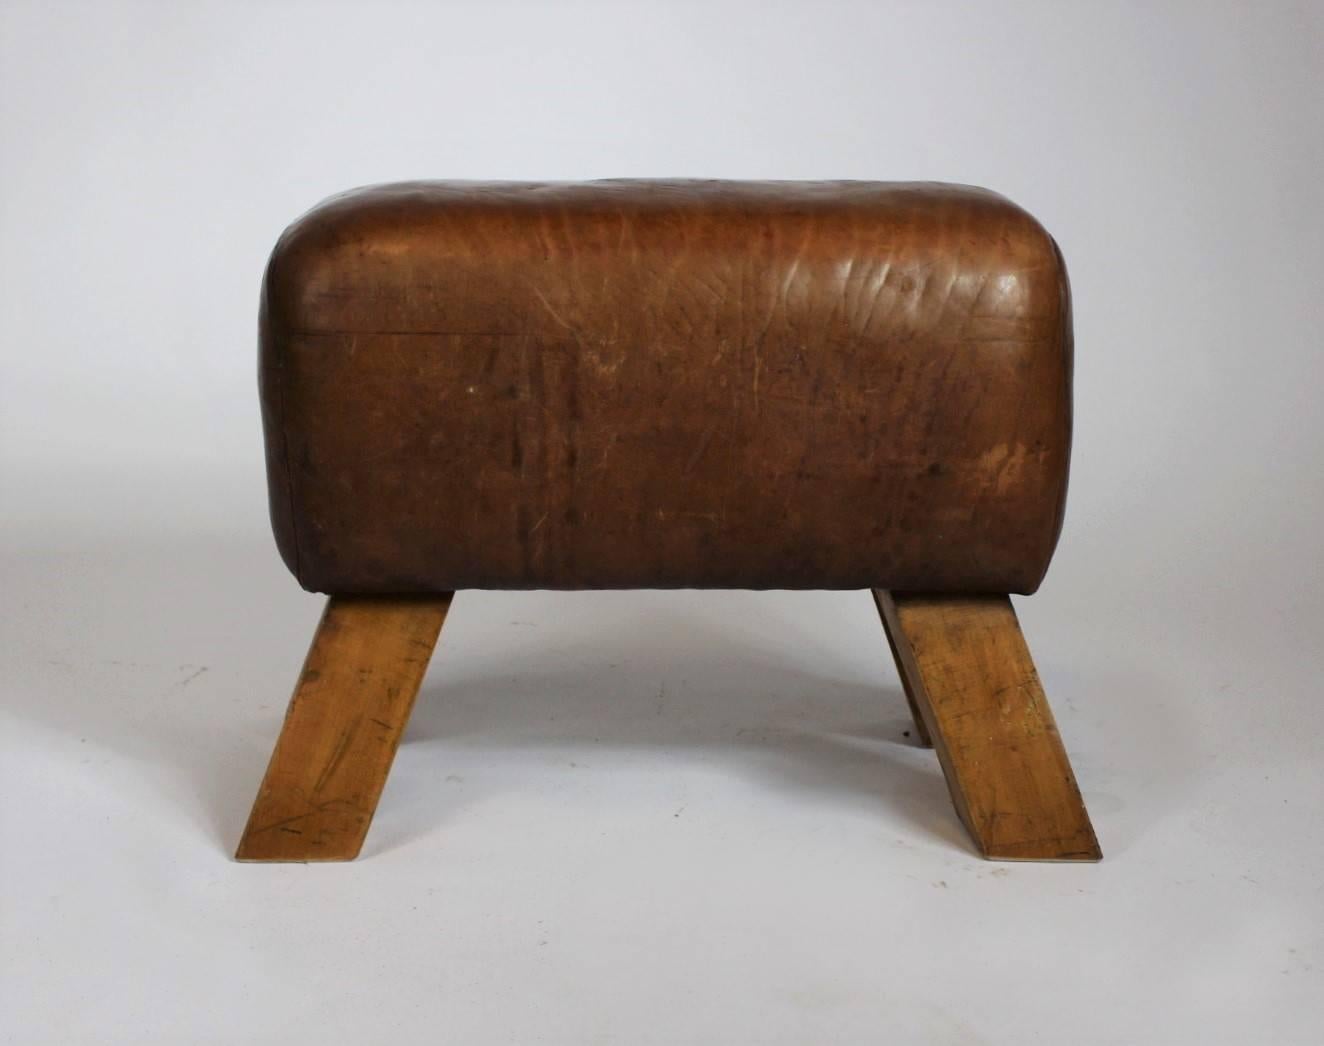 Industrial 1940s Leather Gym Seat